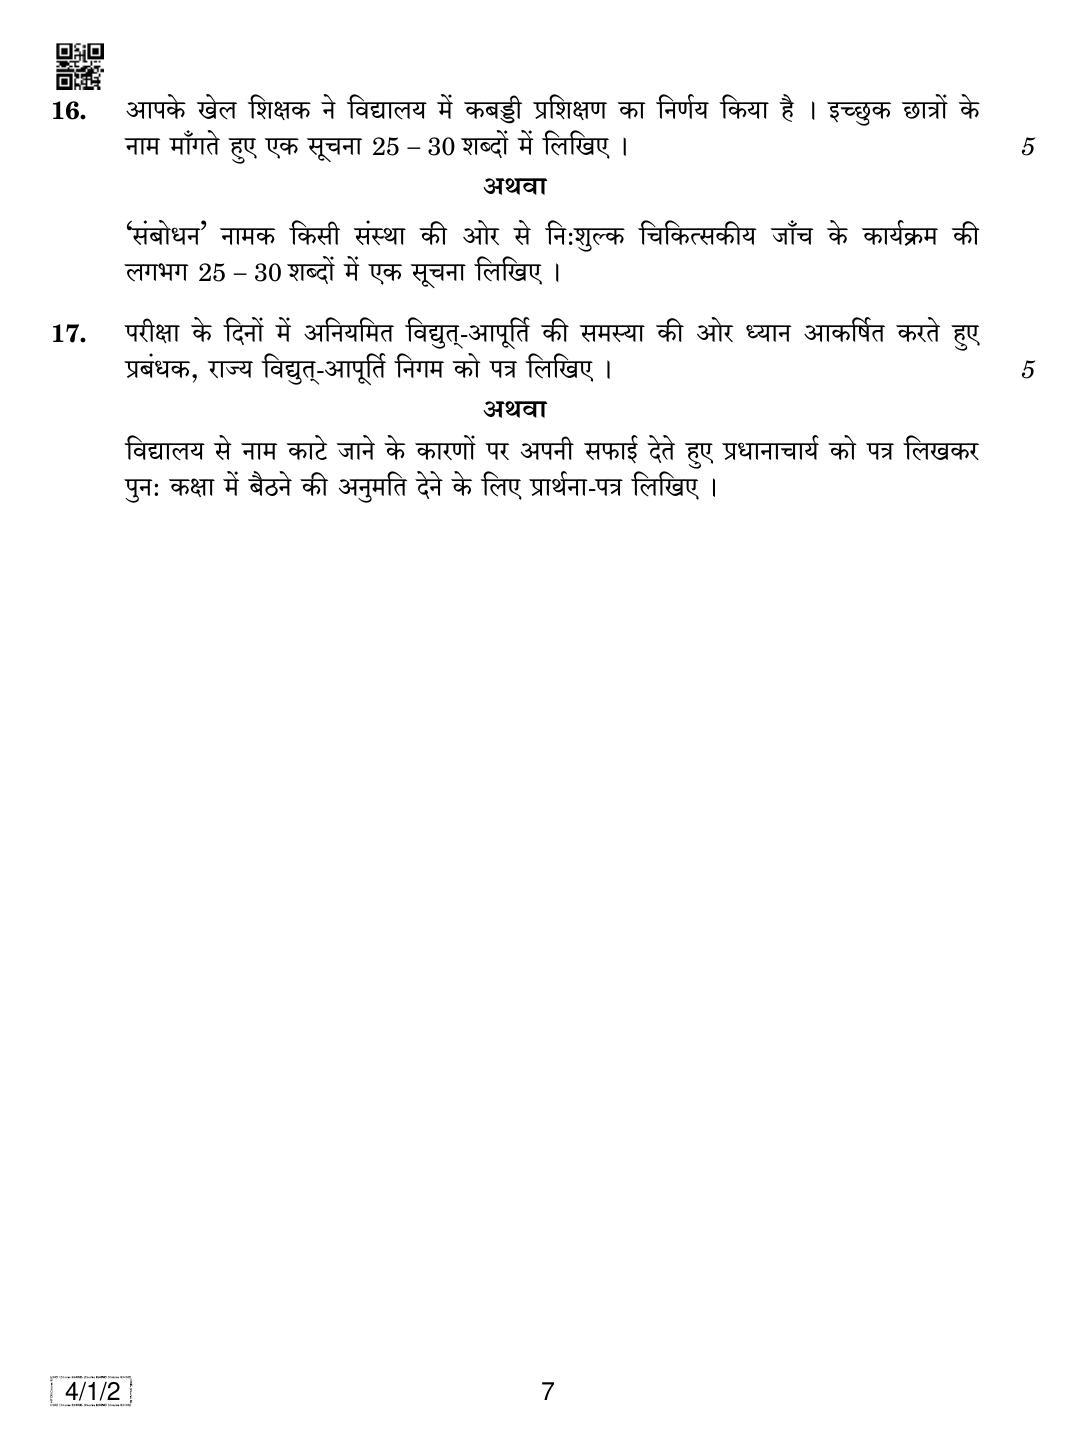 CBSE Class 10 4-1-2 HINDI B 2019 Compartment Question Paper - Page 7